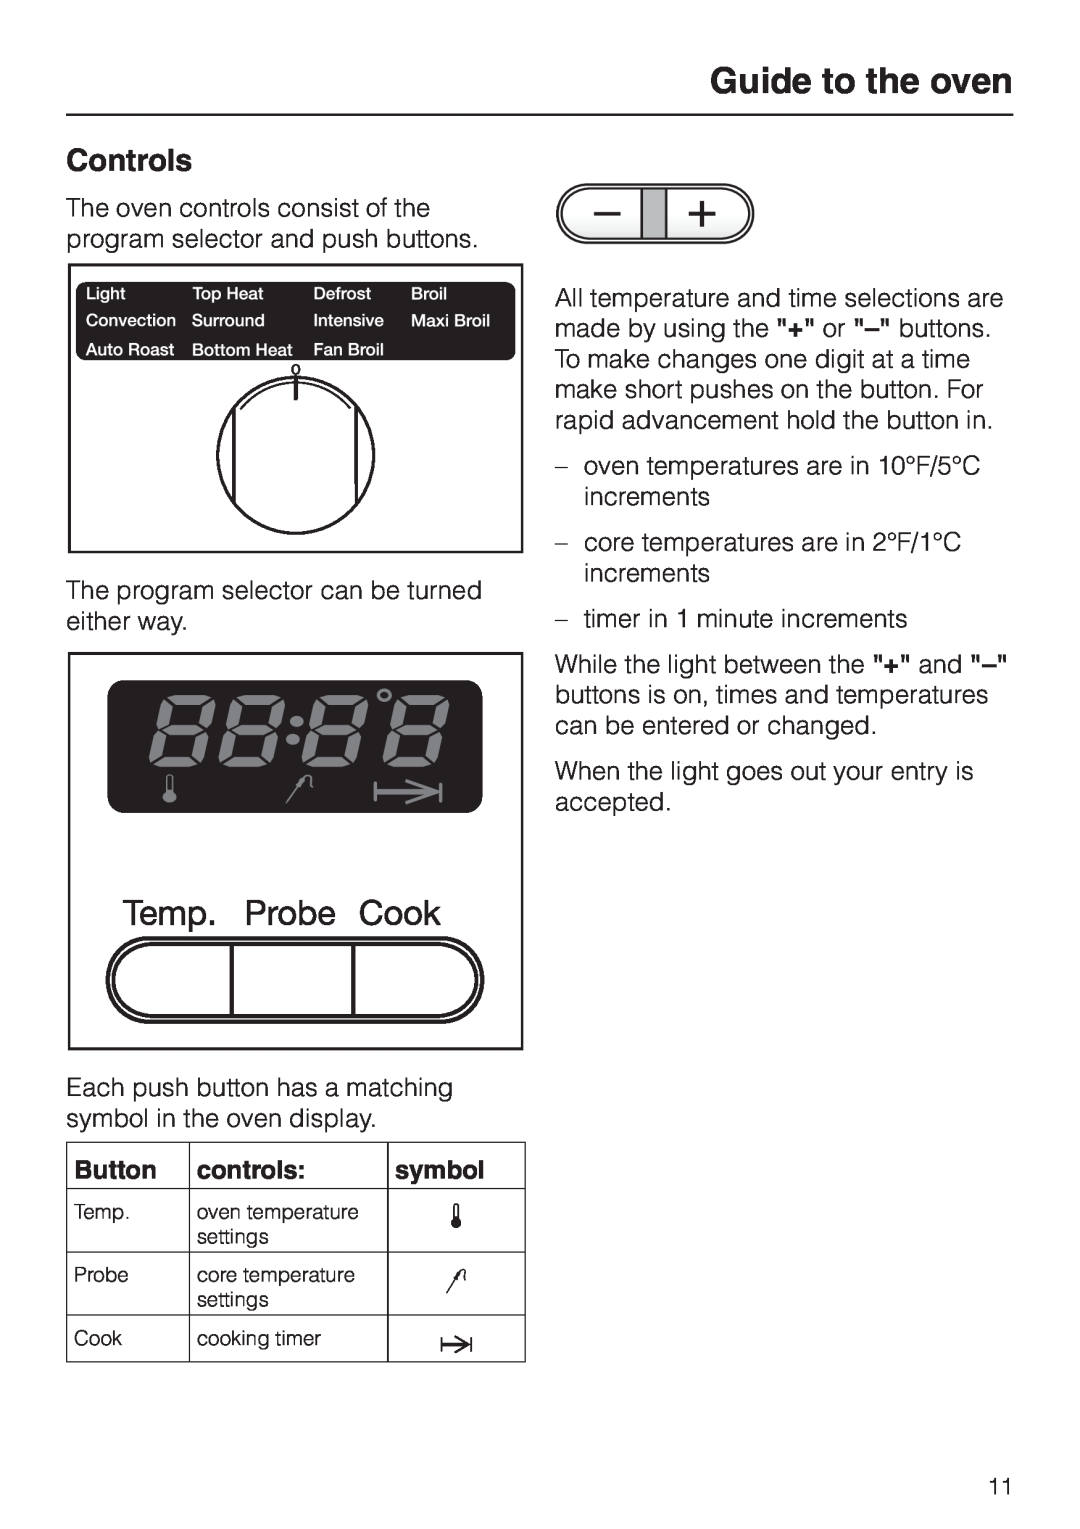 Miele H350-2B operating instructions Controls, Guide to the oven, Button, controls, symbol 